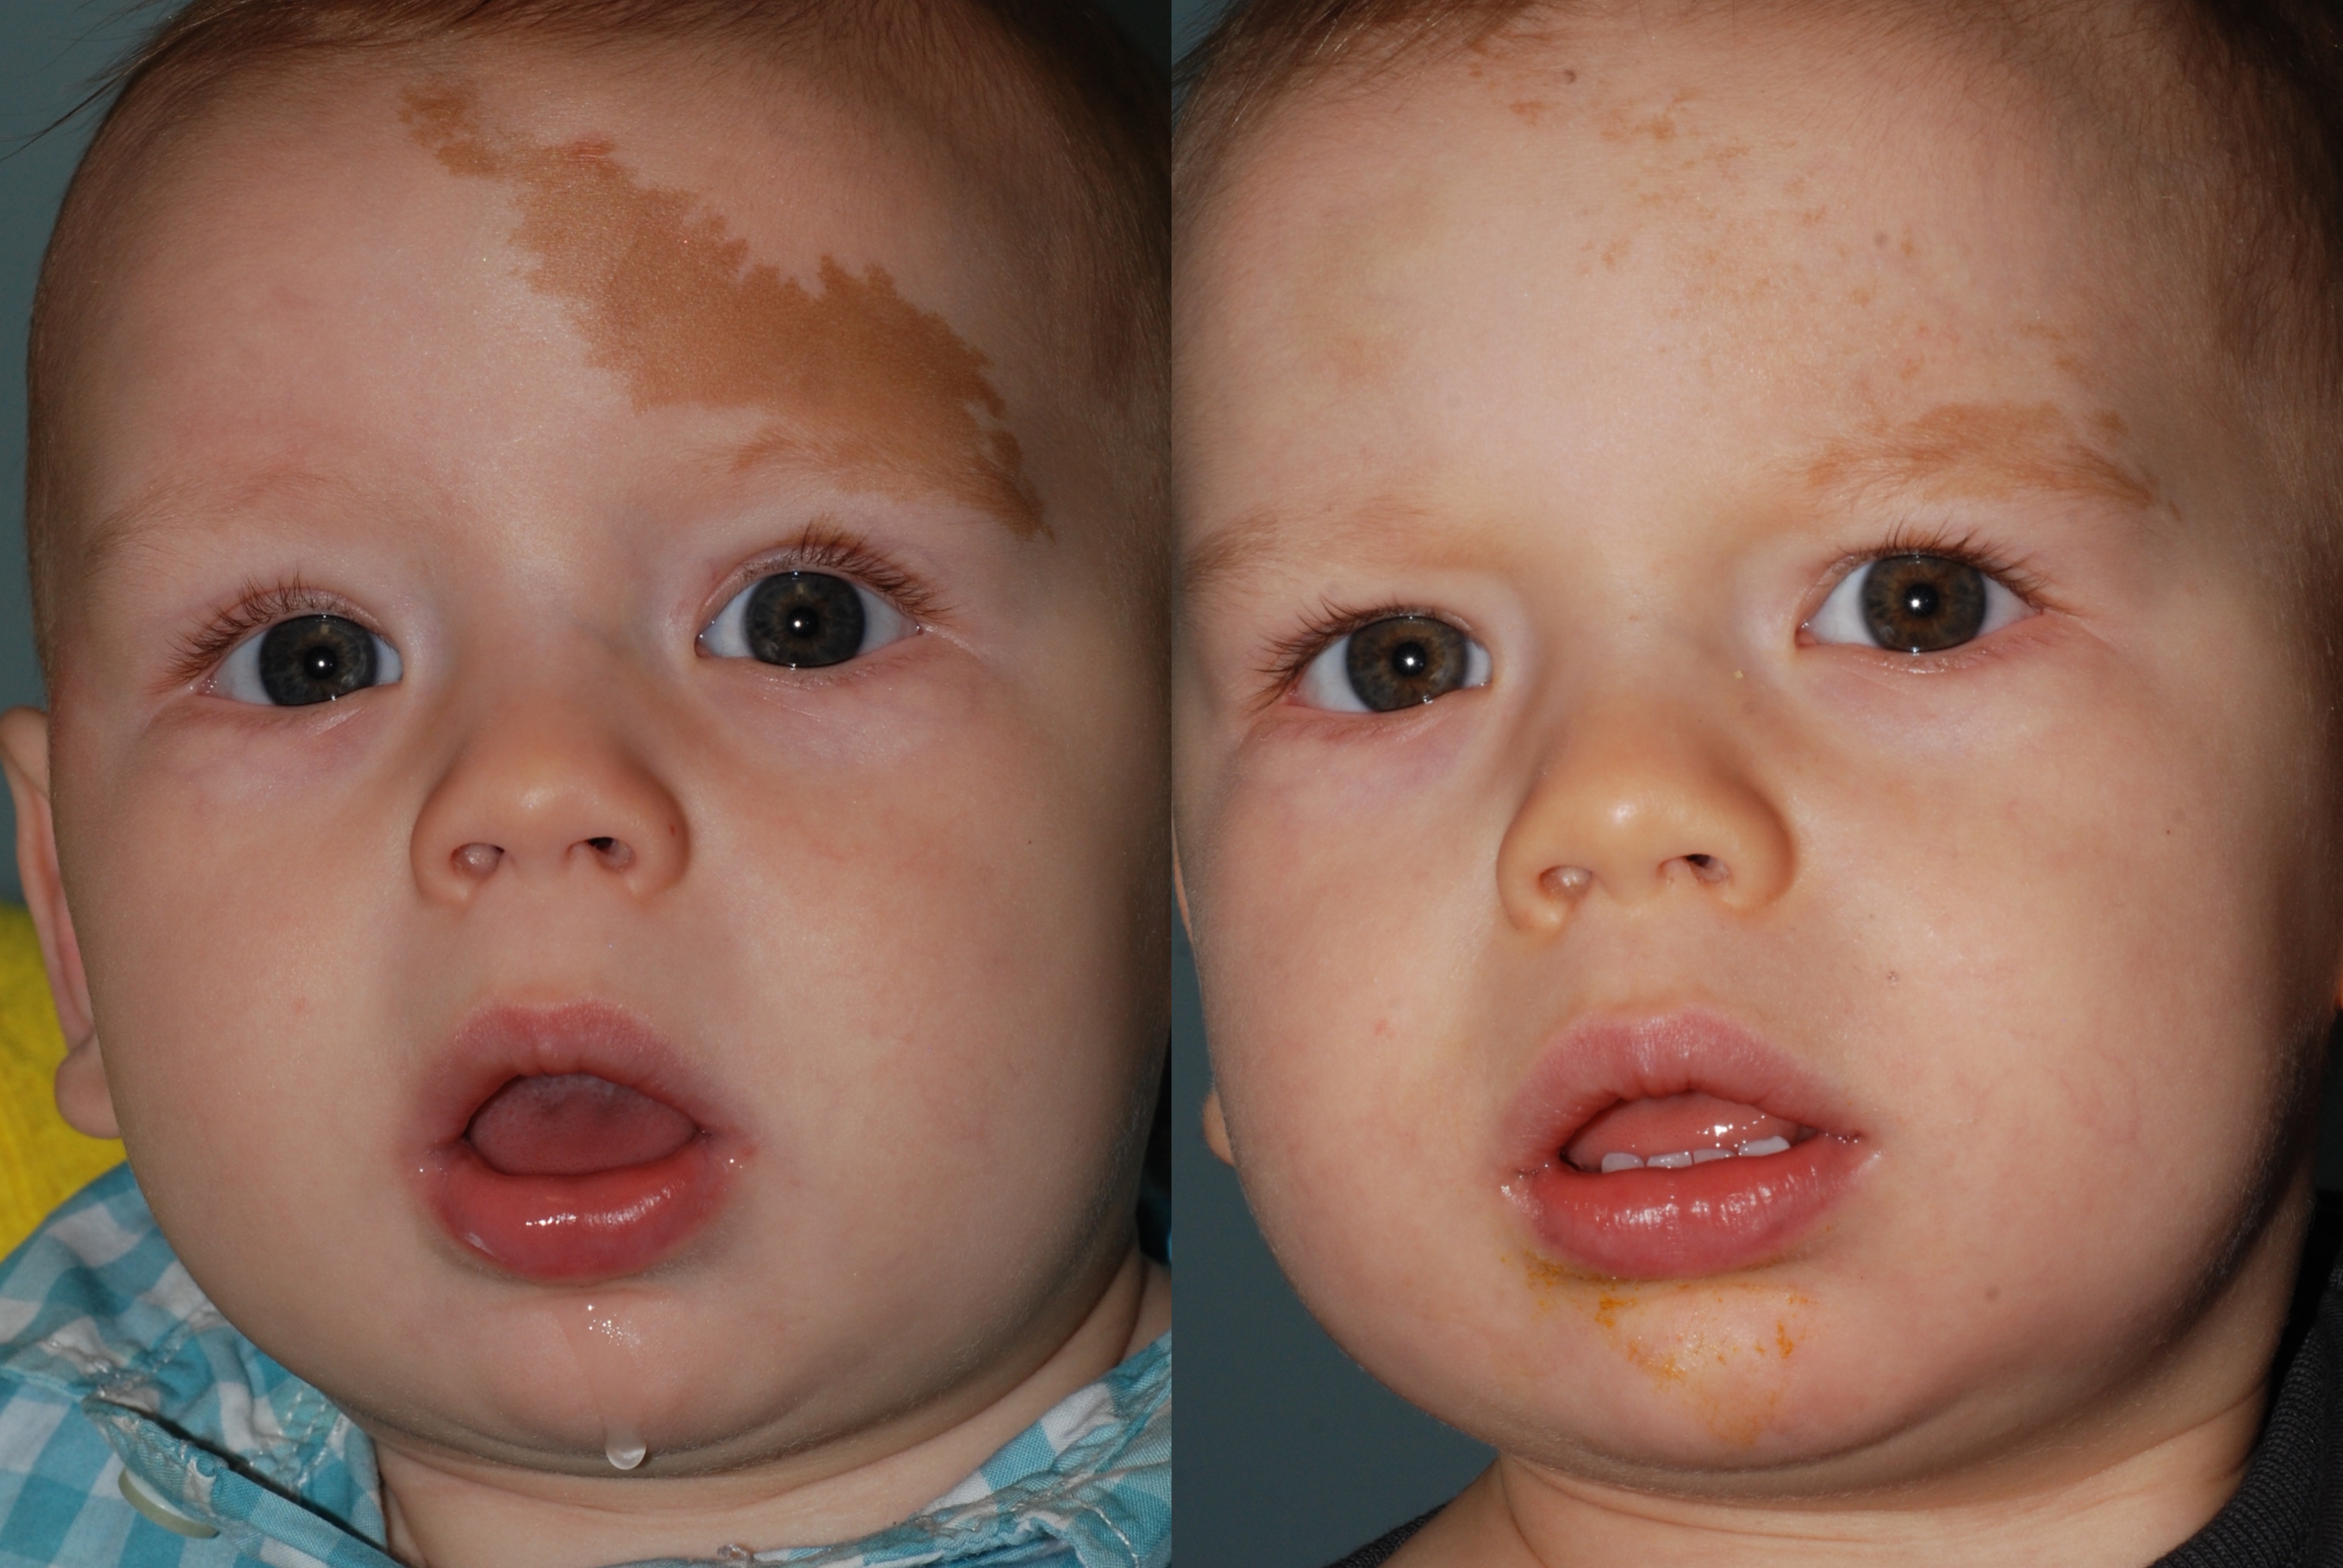 PicoSure treatment of brown birthmark in an infant.